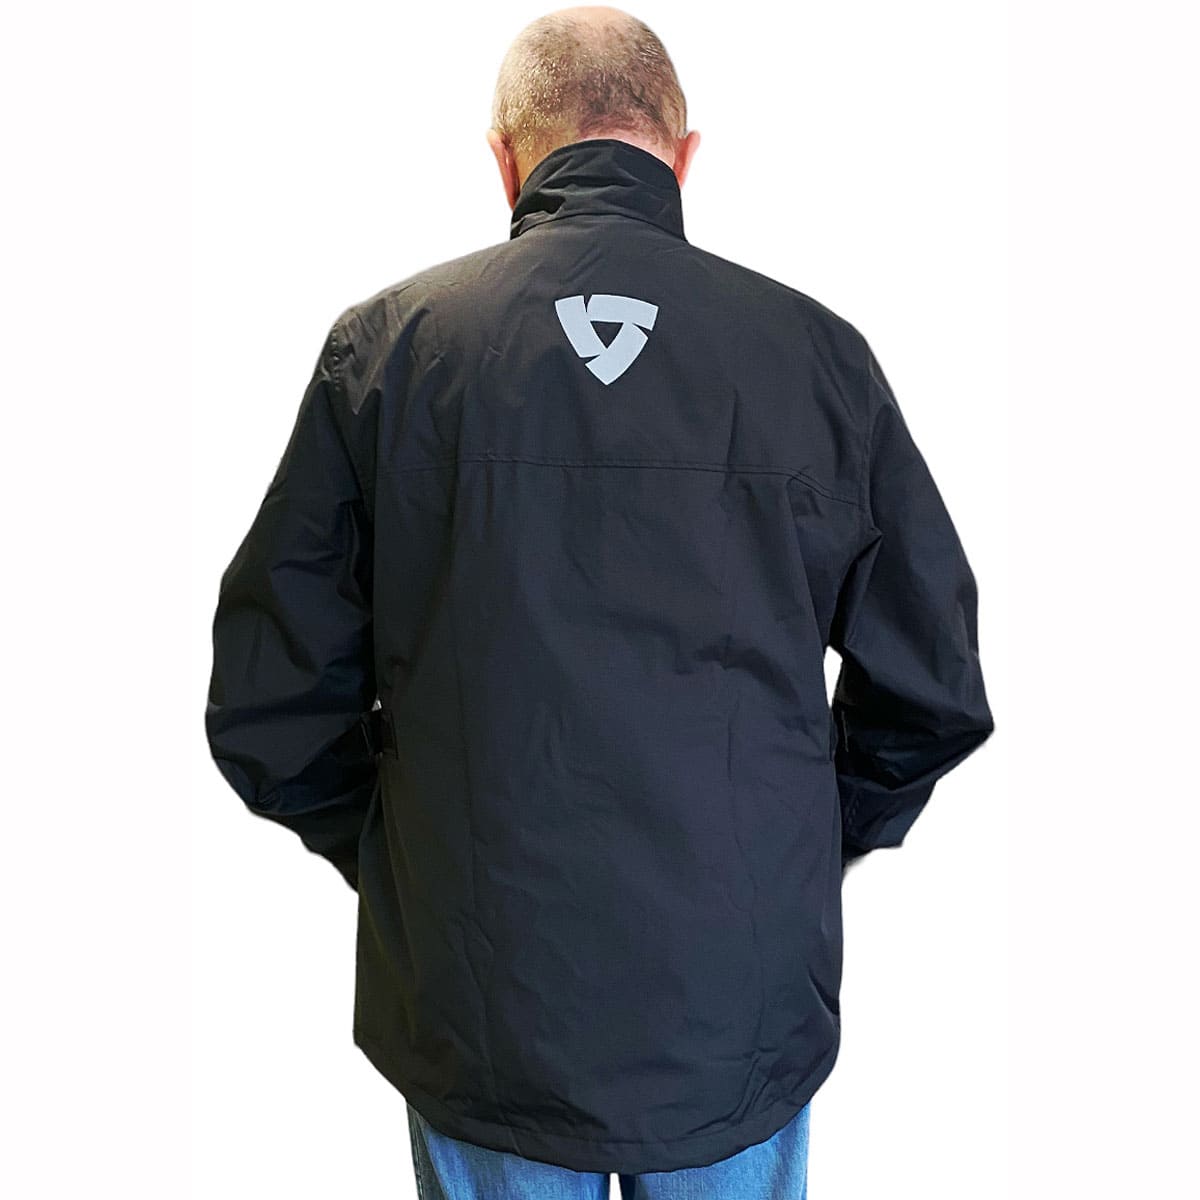 Rev It! Nitric 4 Rain Over Jacket: 100% waterproof protection with a mesh lining for comfort